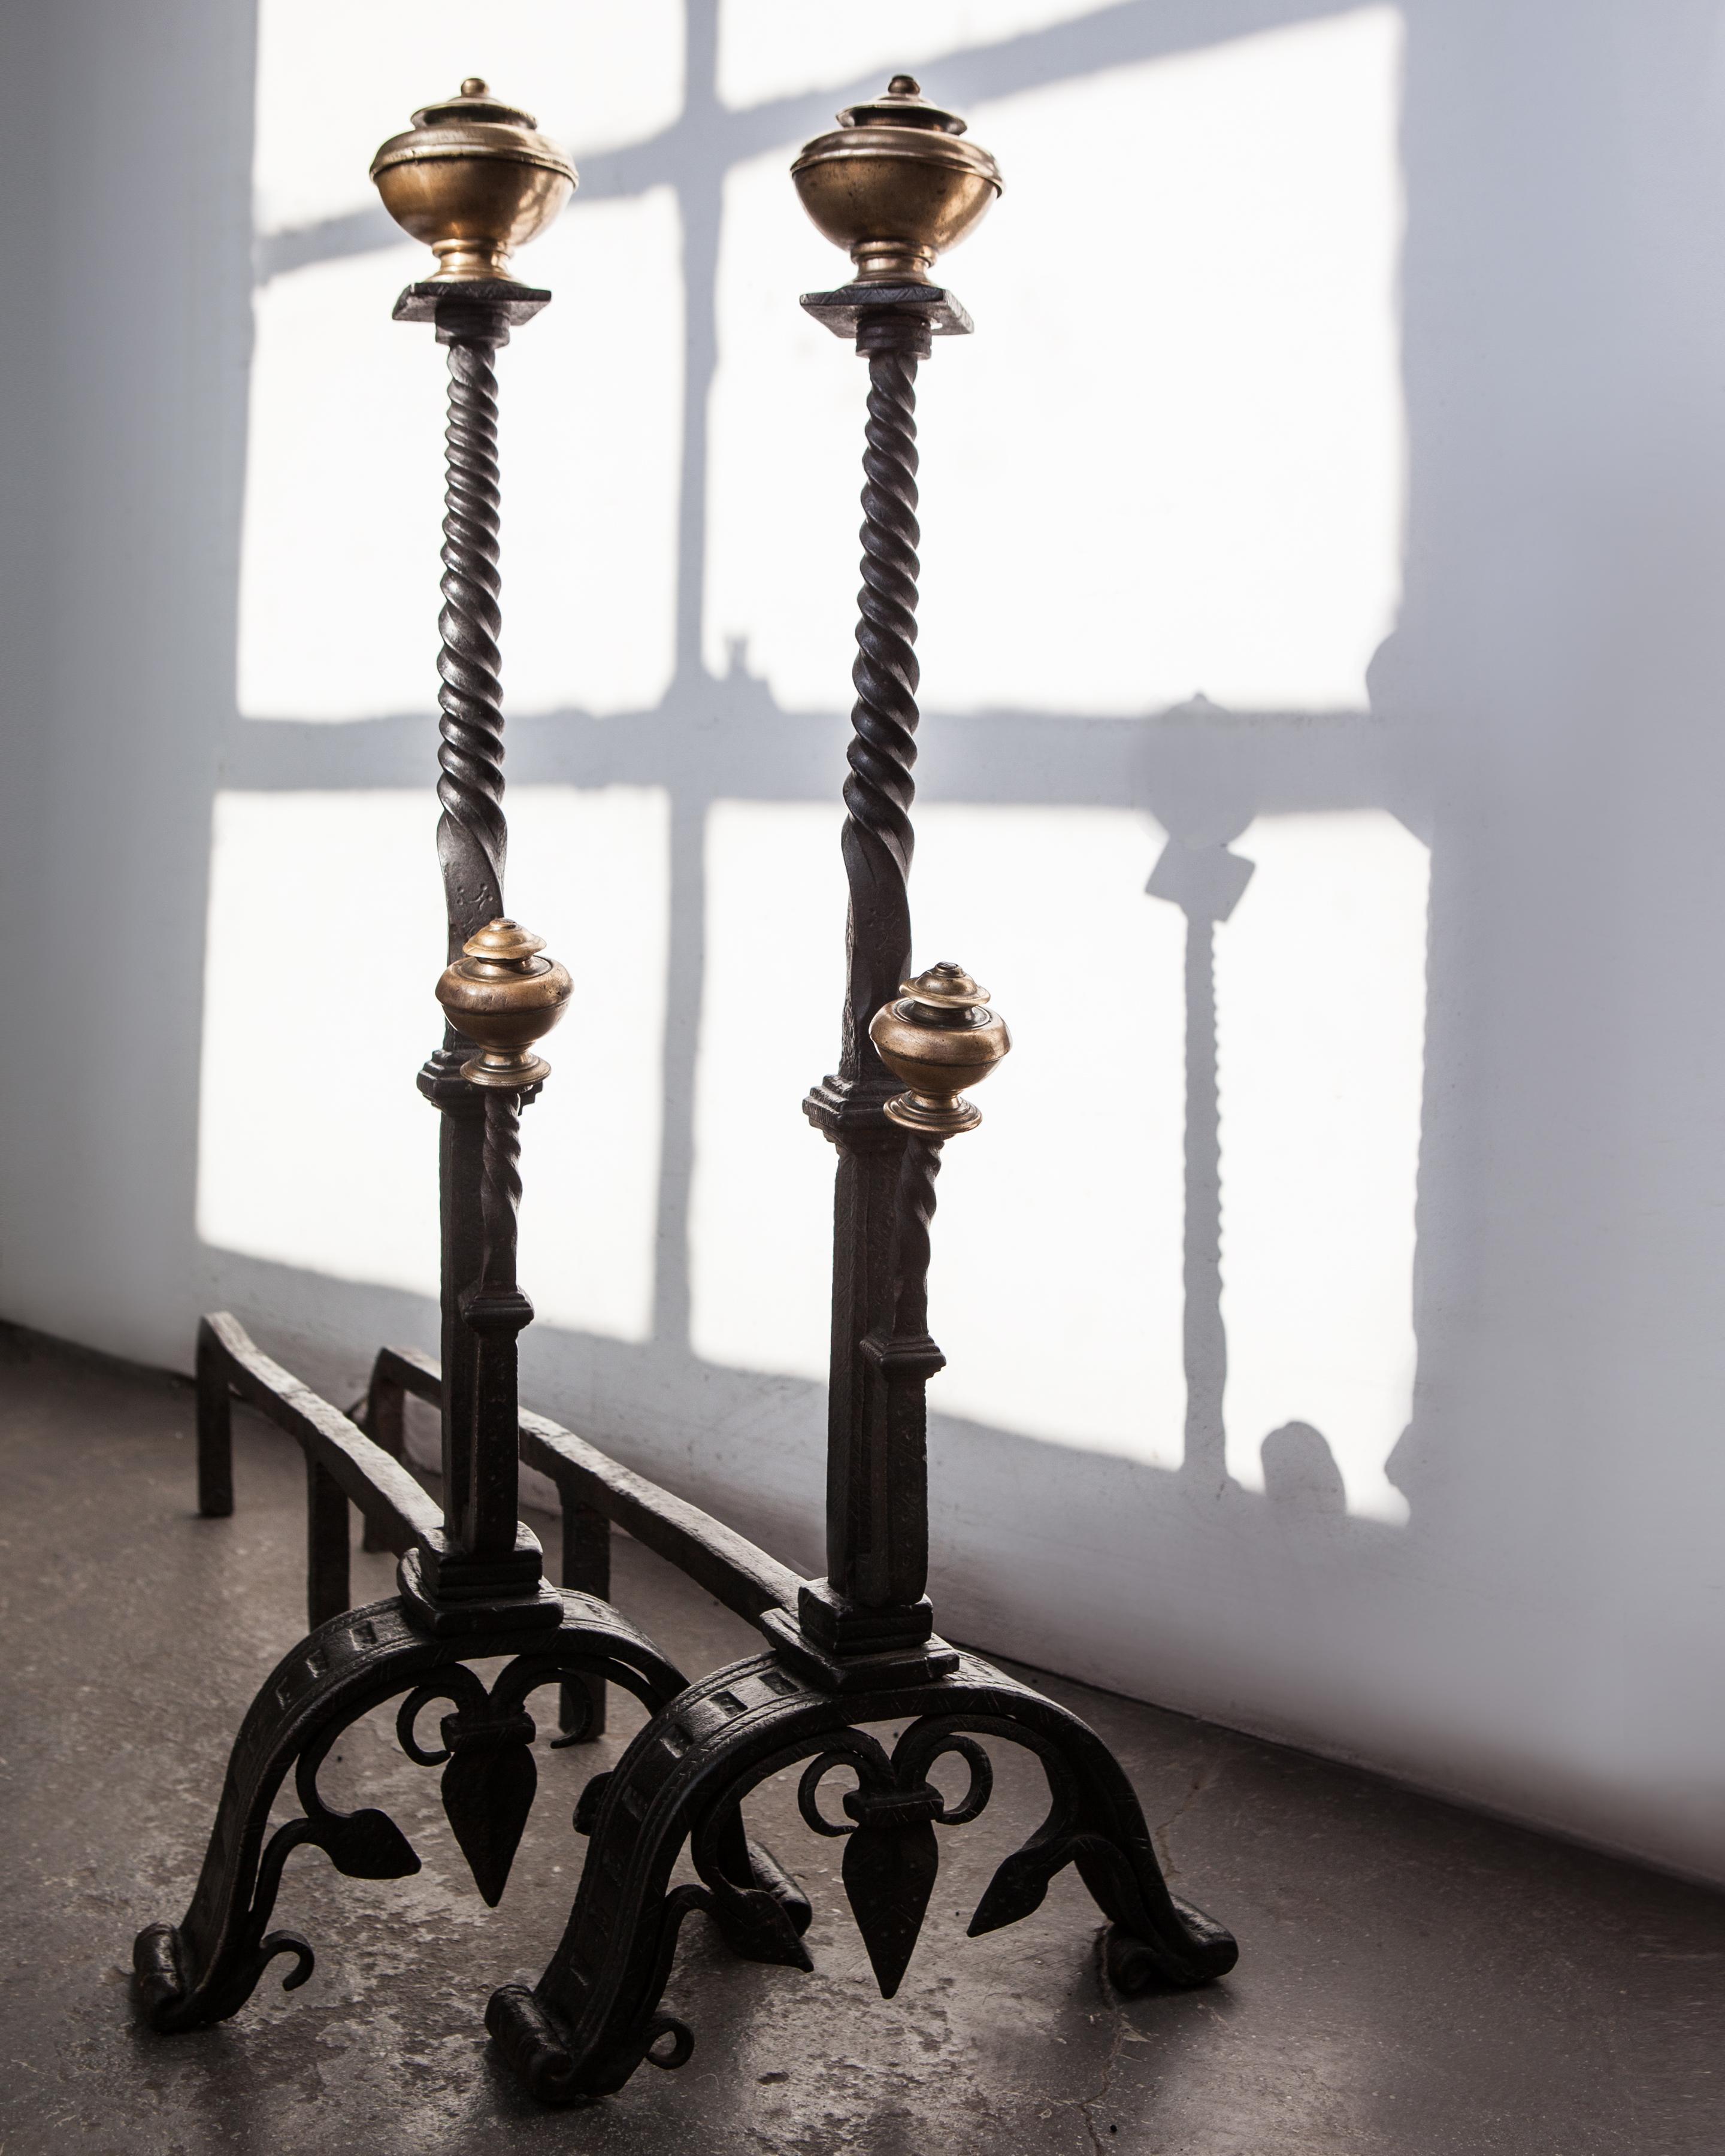 Gothic Wrought Iron Andirons with Forged Scrolled Feet and Brass Finials, 1920s For Sale 3